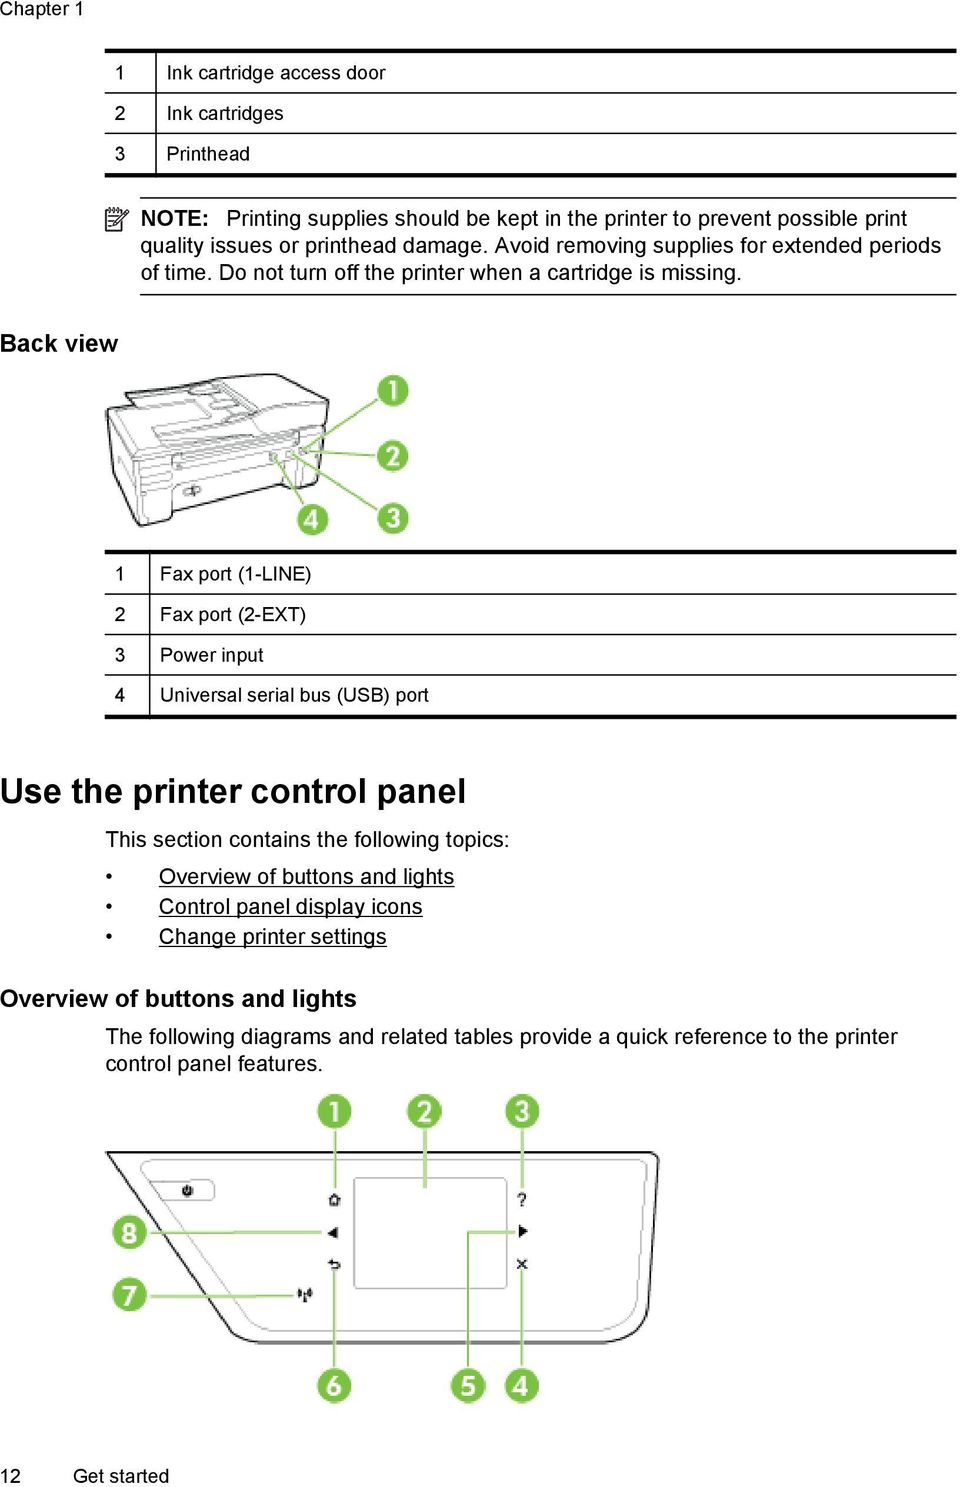 Back view 1 Fax port (1-LINE) 2 Fax port (2-EXT) 3 Power input 4 Universal serial bus (USB) port Use the printer control panel This section contains the following topics: